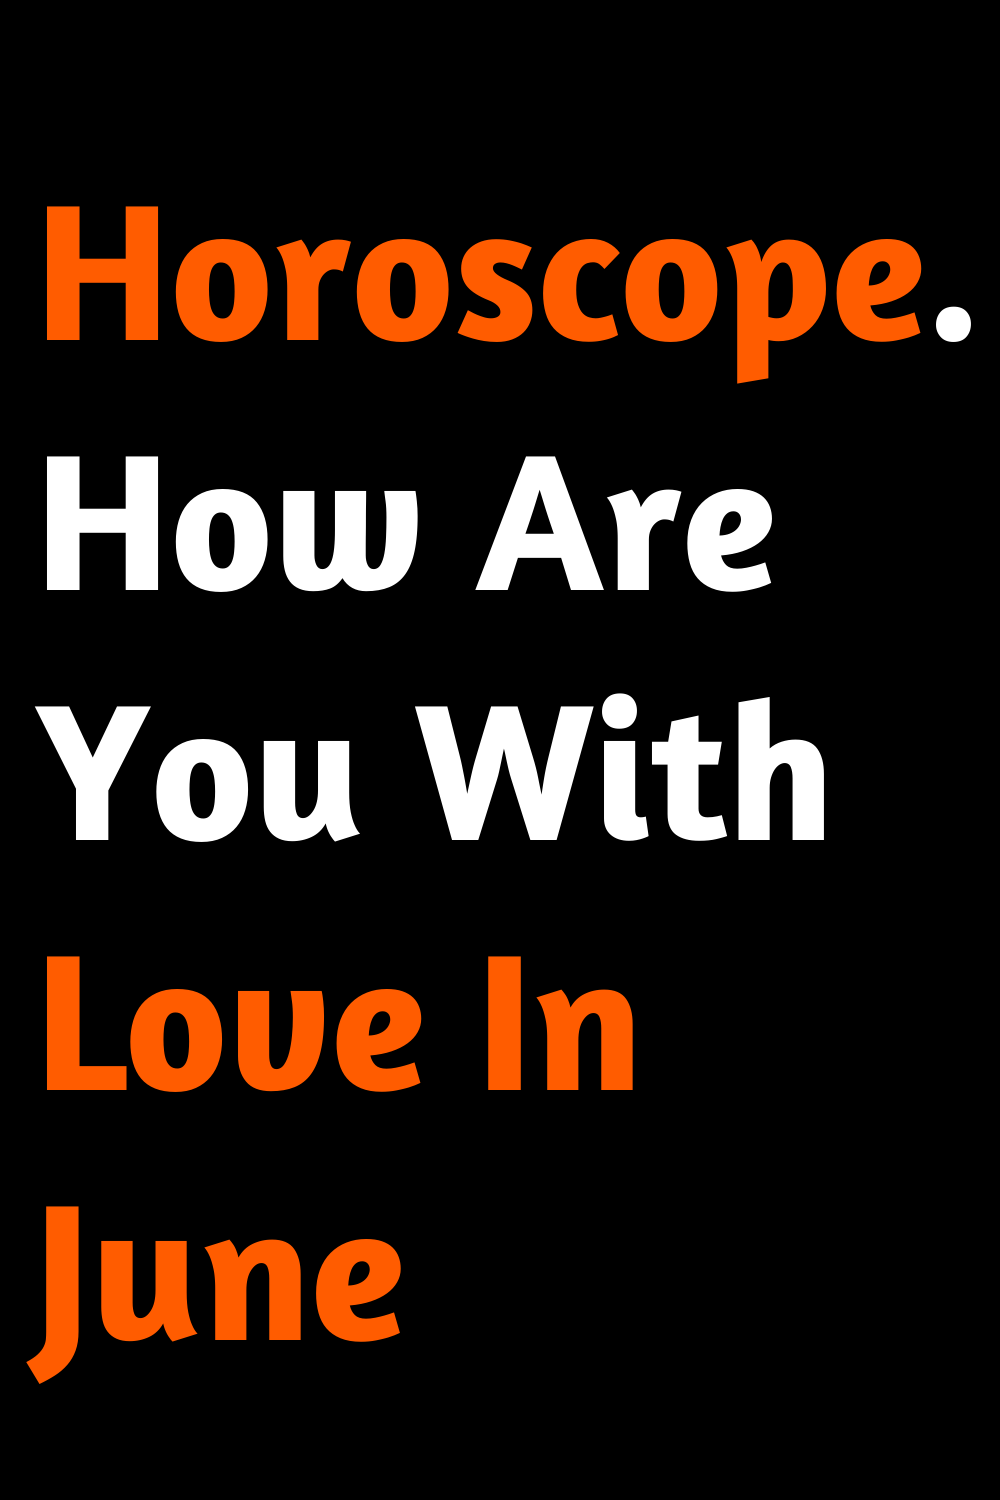 Horoscope. How Are You With Love In June